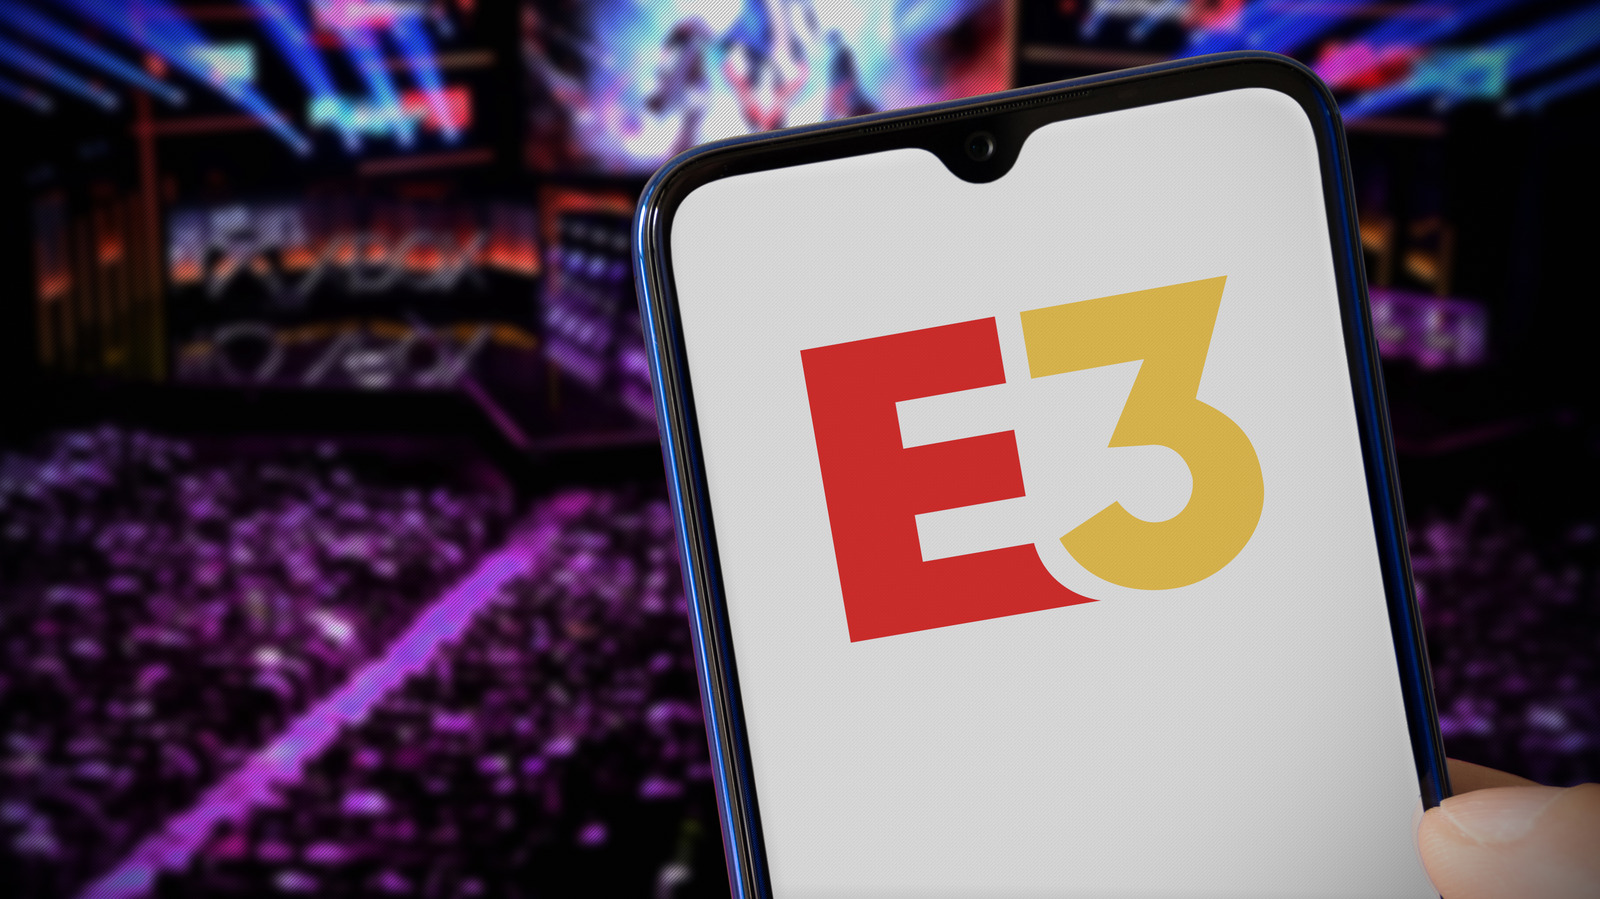 City Document Reveals E3 2024 And 2025 Have Already Been Canceled